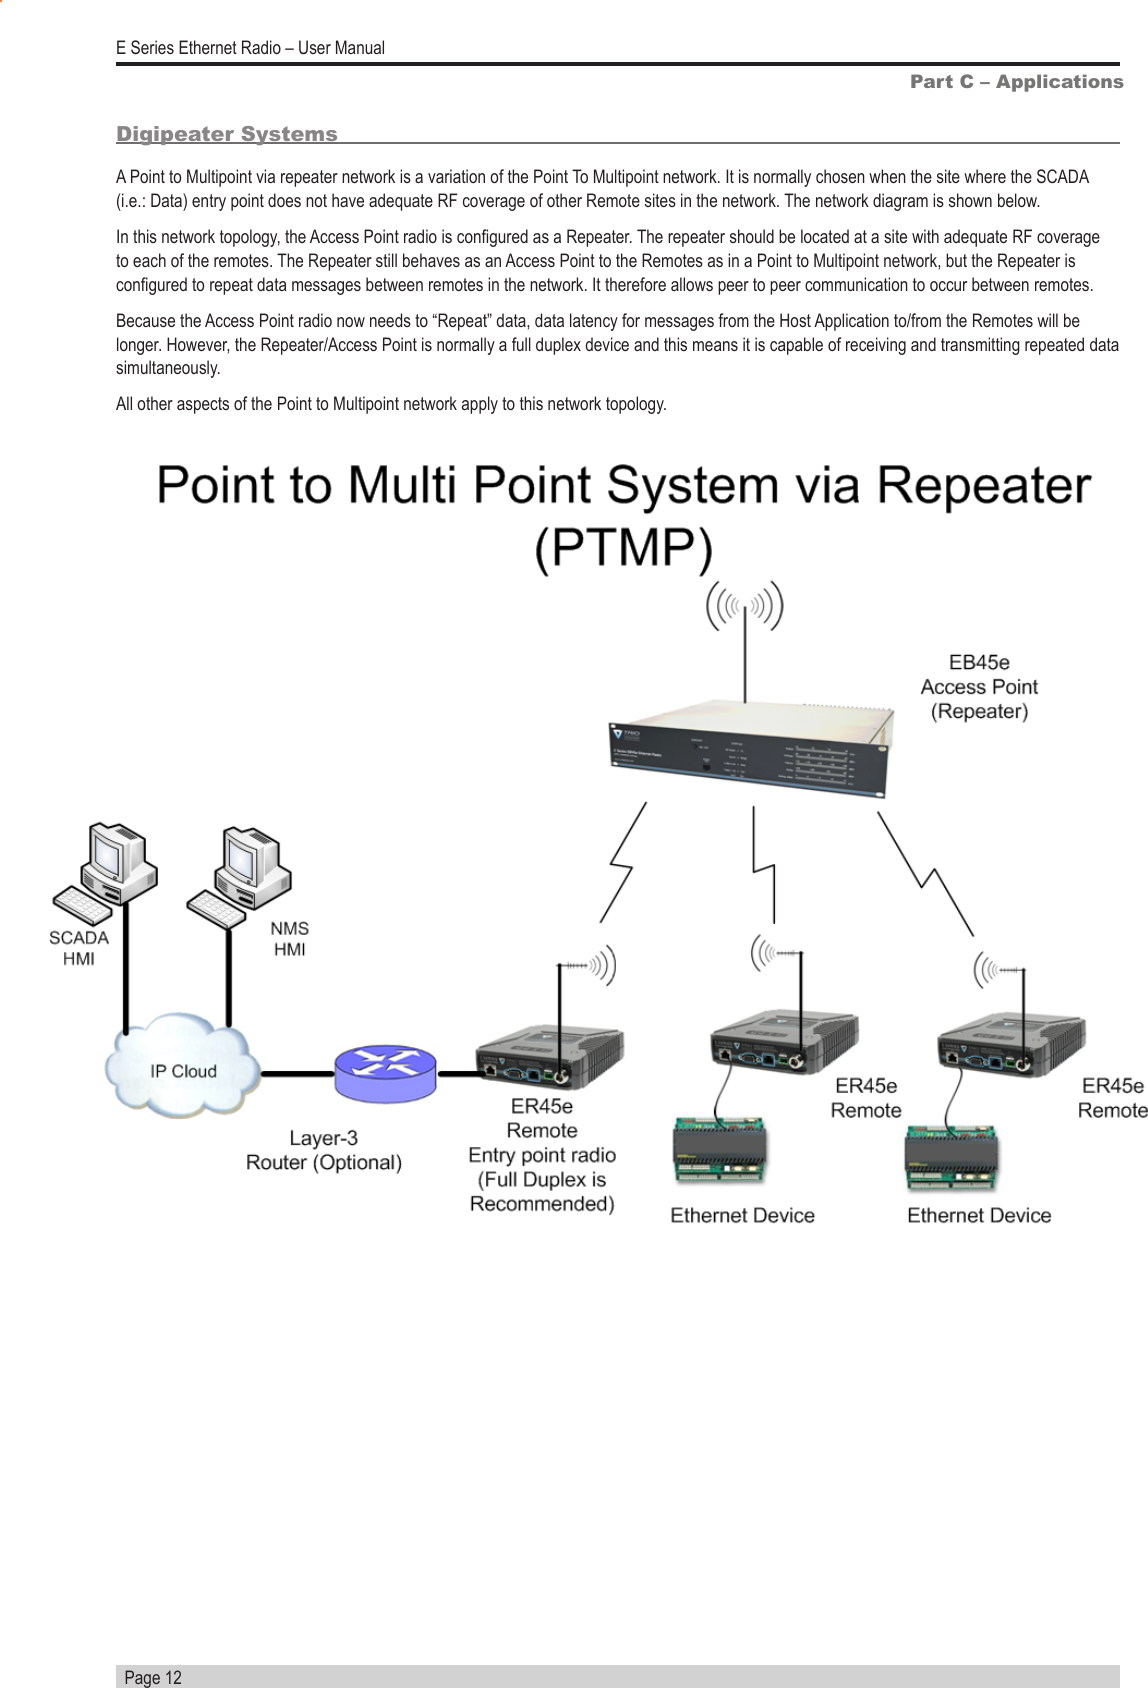   Page 12E Series Ethernet Radio – User ManualPart C – ApplicationsDigipeater SystemsA Point to Multipoint via repeater network is a variation of the Point To Multipoint network. It is normally chosen when the site where the SCADA (i.e.: Data) entry point does not have adequate RF coverage of other Remote sites in the network. The network diagram is shown below.In this network topology, the Access Point radio is congured as a Repeater. The repeater should be located at a site with adequate RF coverage to each of the remotes. The Repeater still behaves as an Access Point to the Remotes as in a Point to Multipoint network, but the Repeater is congured to repeat data messages between remotes in the network. It therefore allows peer to peer communication to occur between remotes.Because the Access Point radio now needs to “Repeat” data, data latency for messages from the Host Application to/from the Remotes will be longer. However, the Repeater/Access Point is normally a full duplex device and this means it is capable of receiving and transmitting repeated data simultaneously.All other aspects of the Point to Multipoint network apply to this network topology.